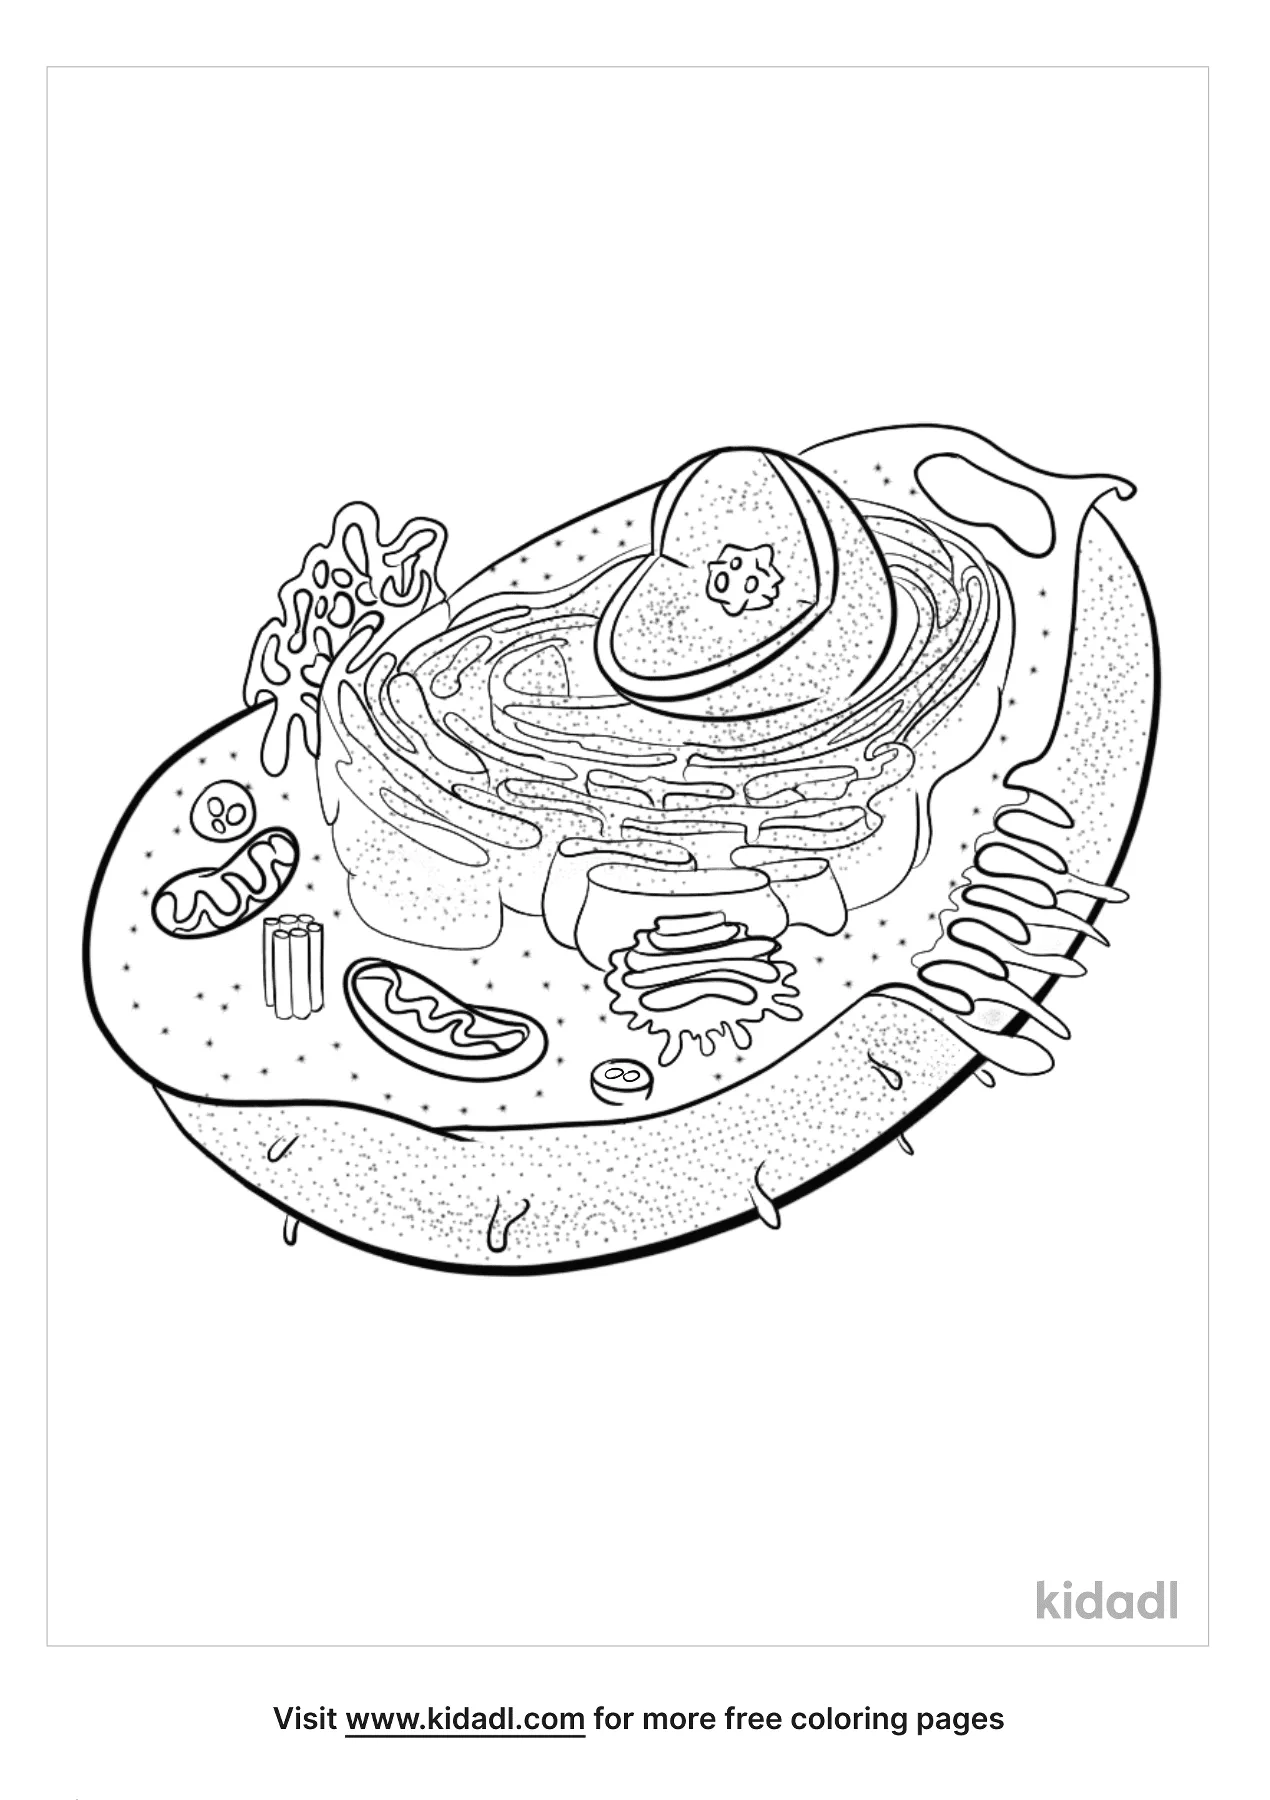 Animal Cell Coloring Pages  Free Science Coloring Pages  Kidadl For Animal Cells Coloring Worksheet